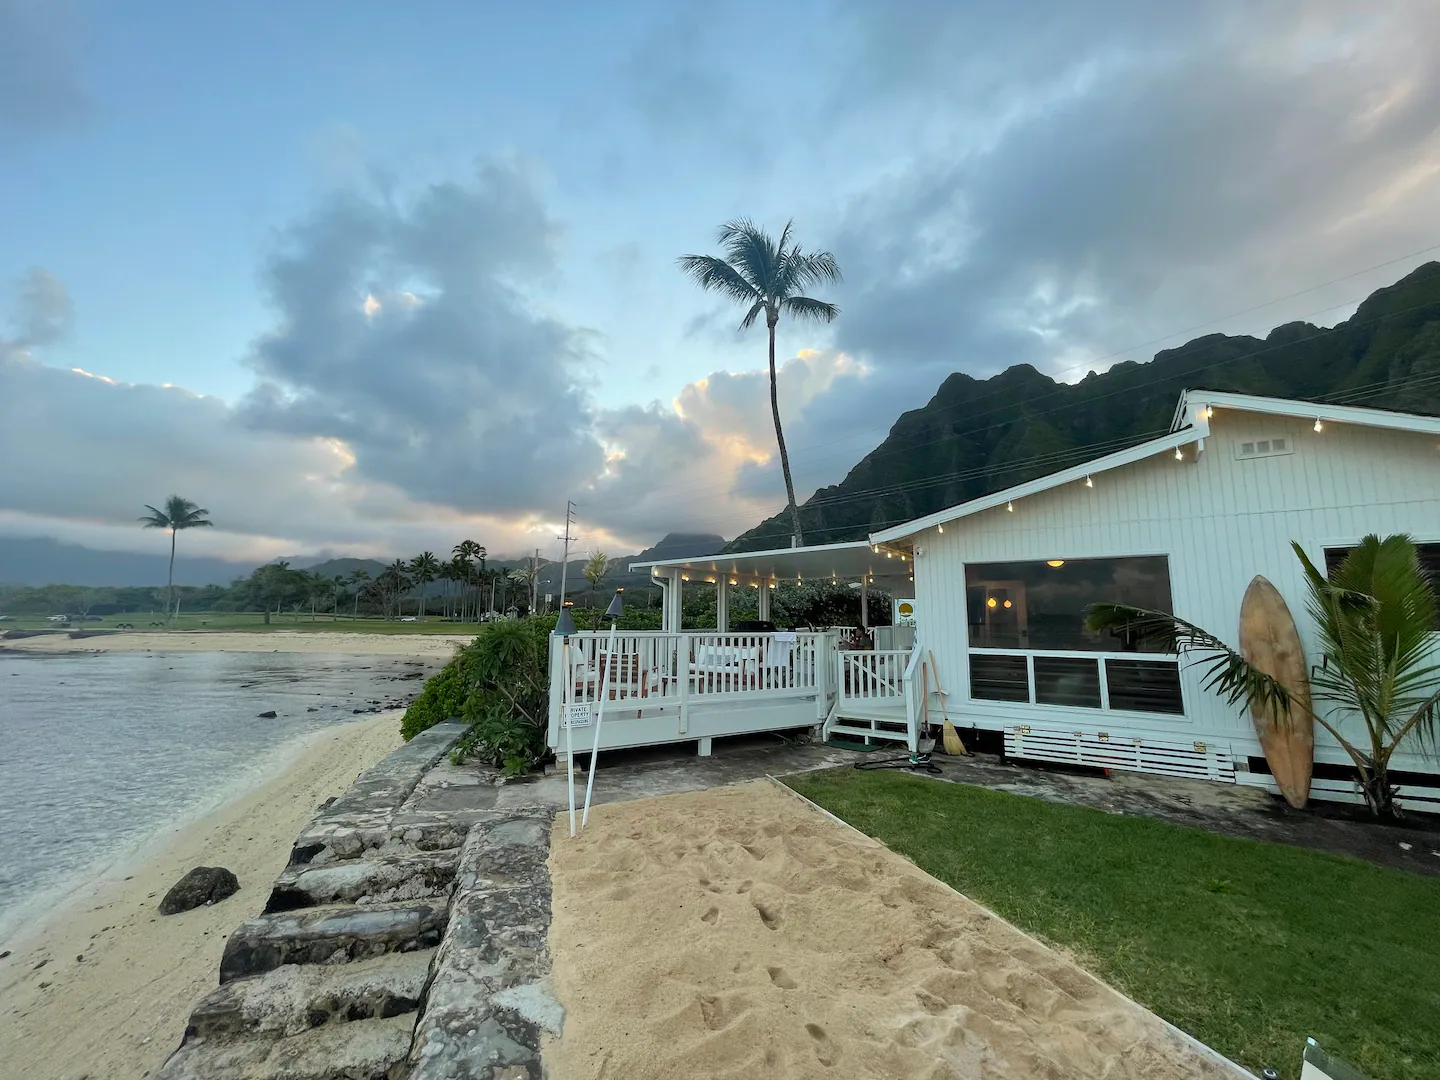 Oceanfront Kaneohe Beach Cottage, one of the best Airbnbs in Hawaii